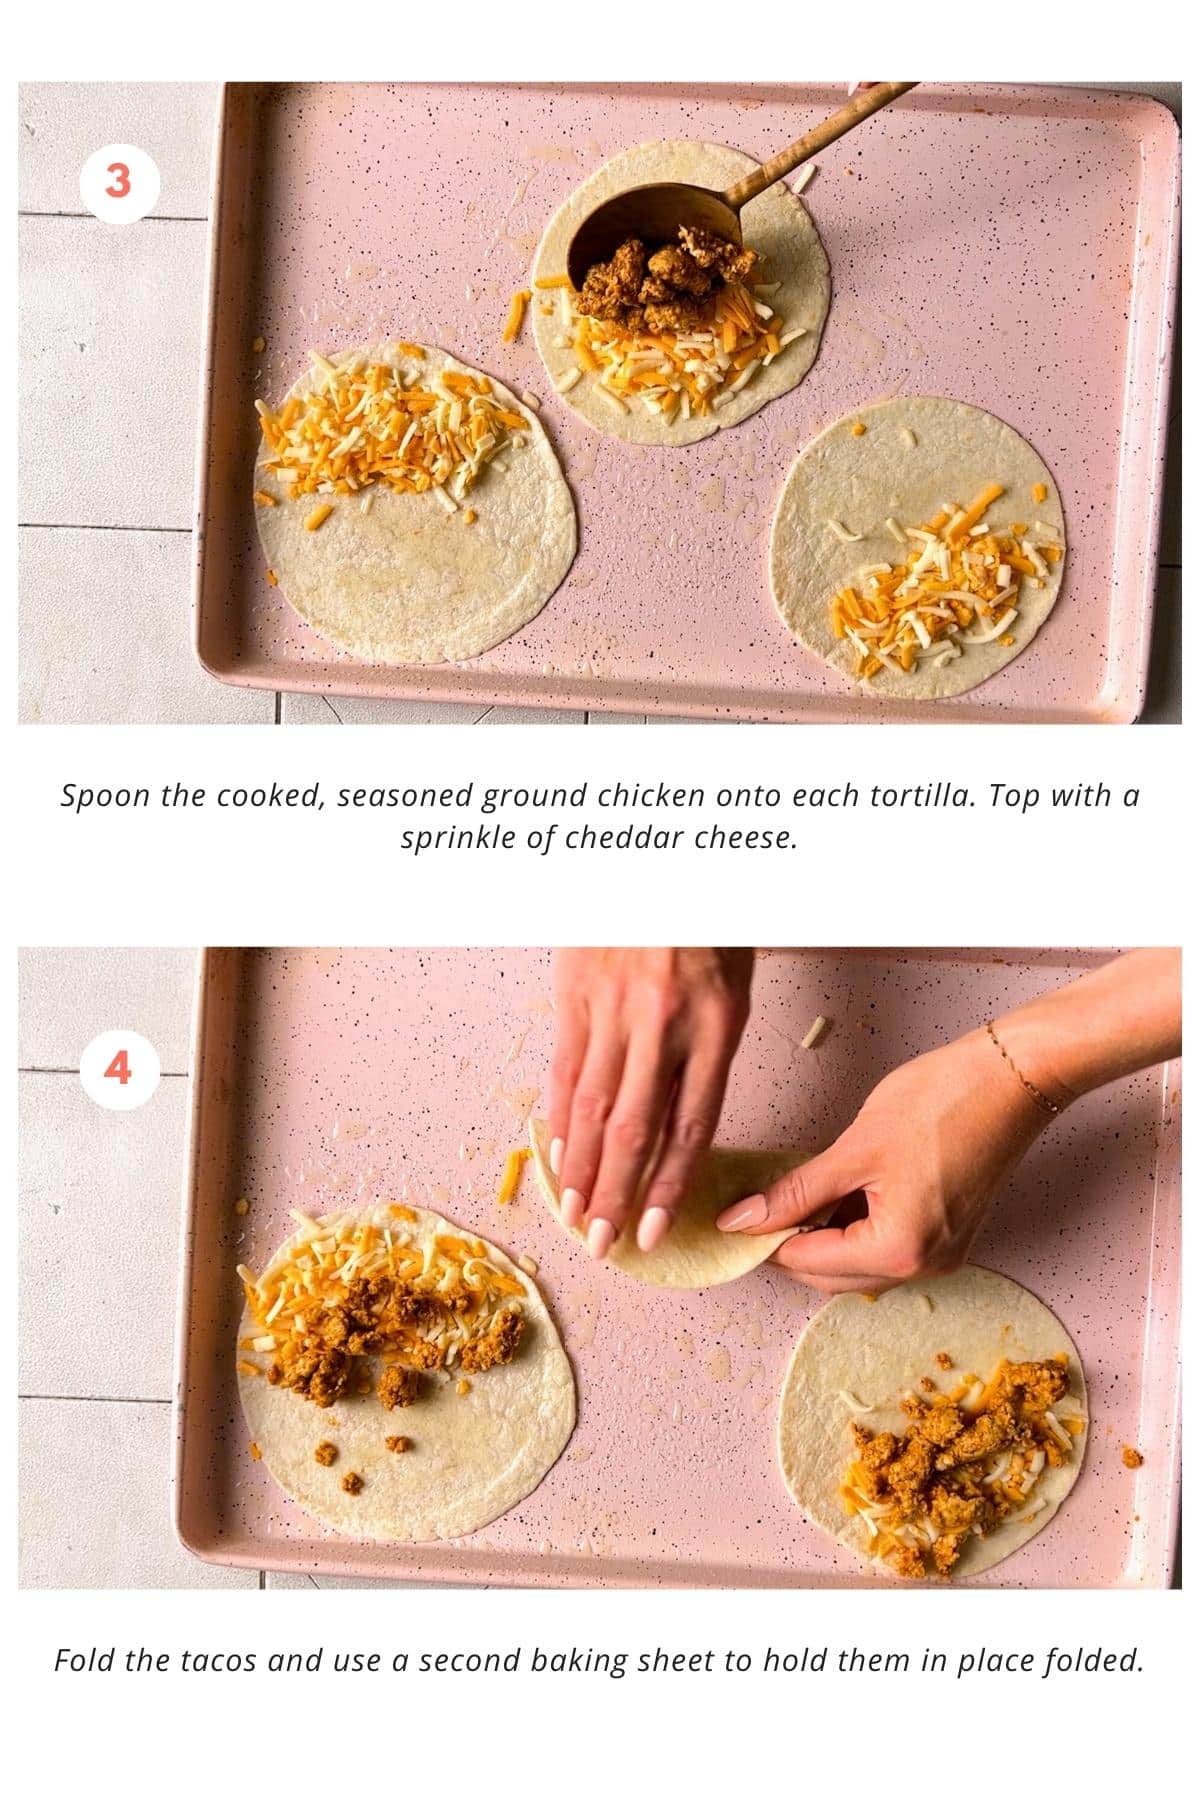 Cooked, seasoned ground chicken spooned onto tortillas. Sprinkle of cheddar cheese on top. Tacos folded and secured with a second baking sheet.